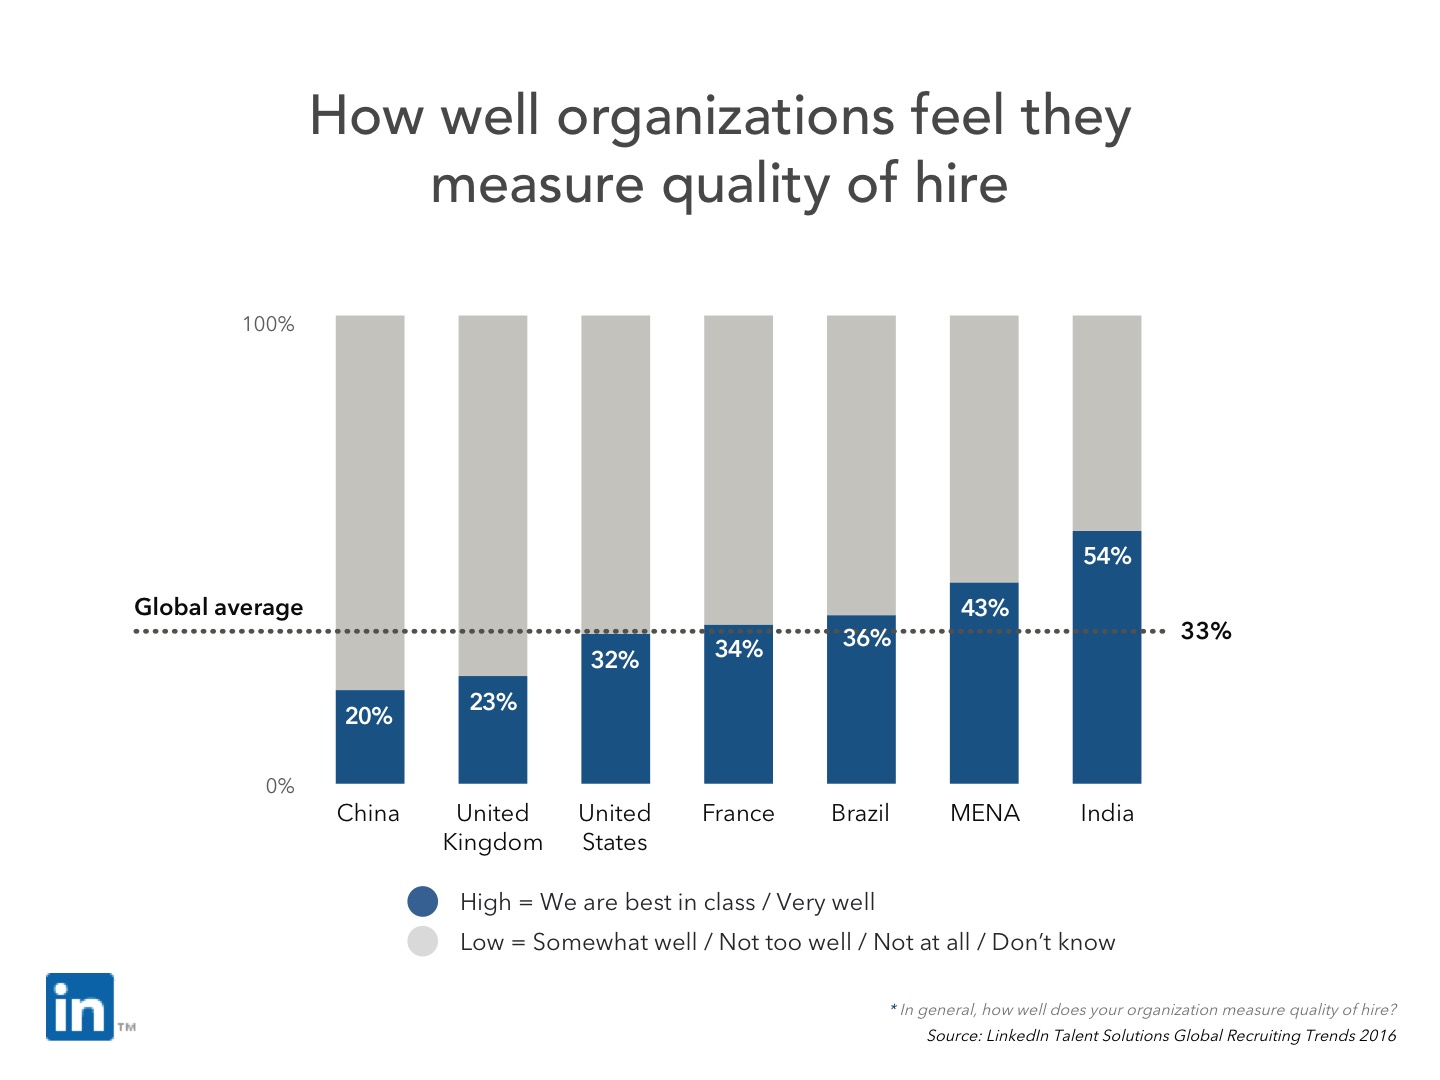 Measuring quality of hire